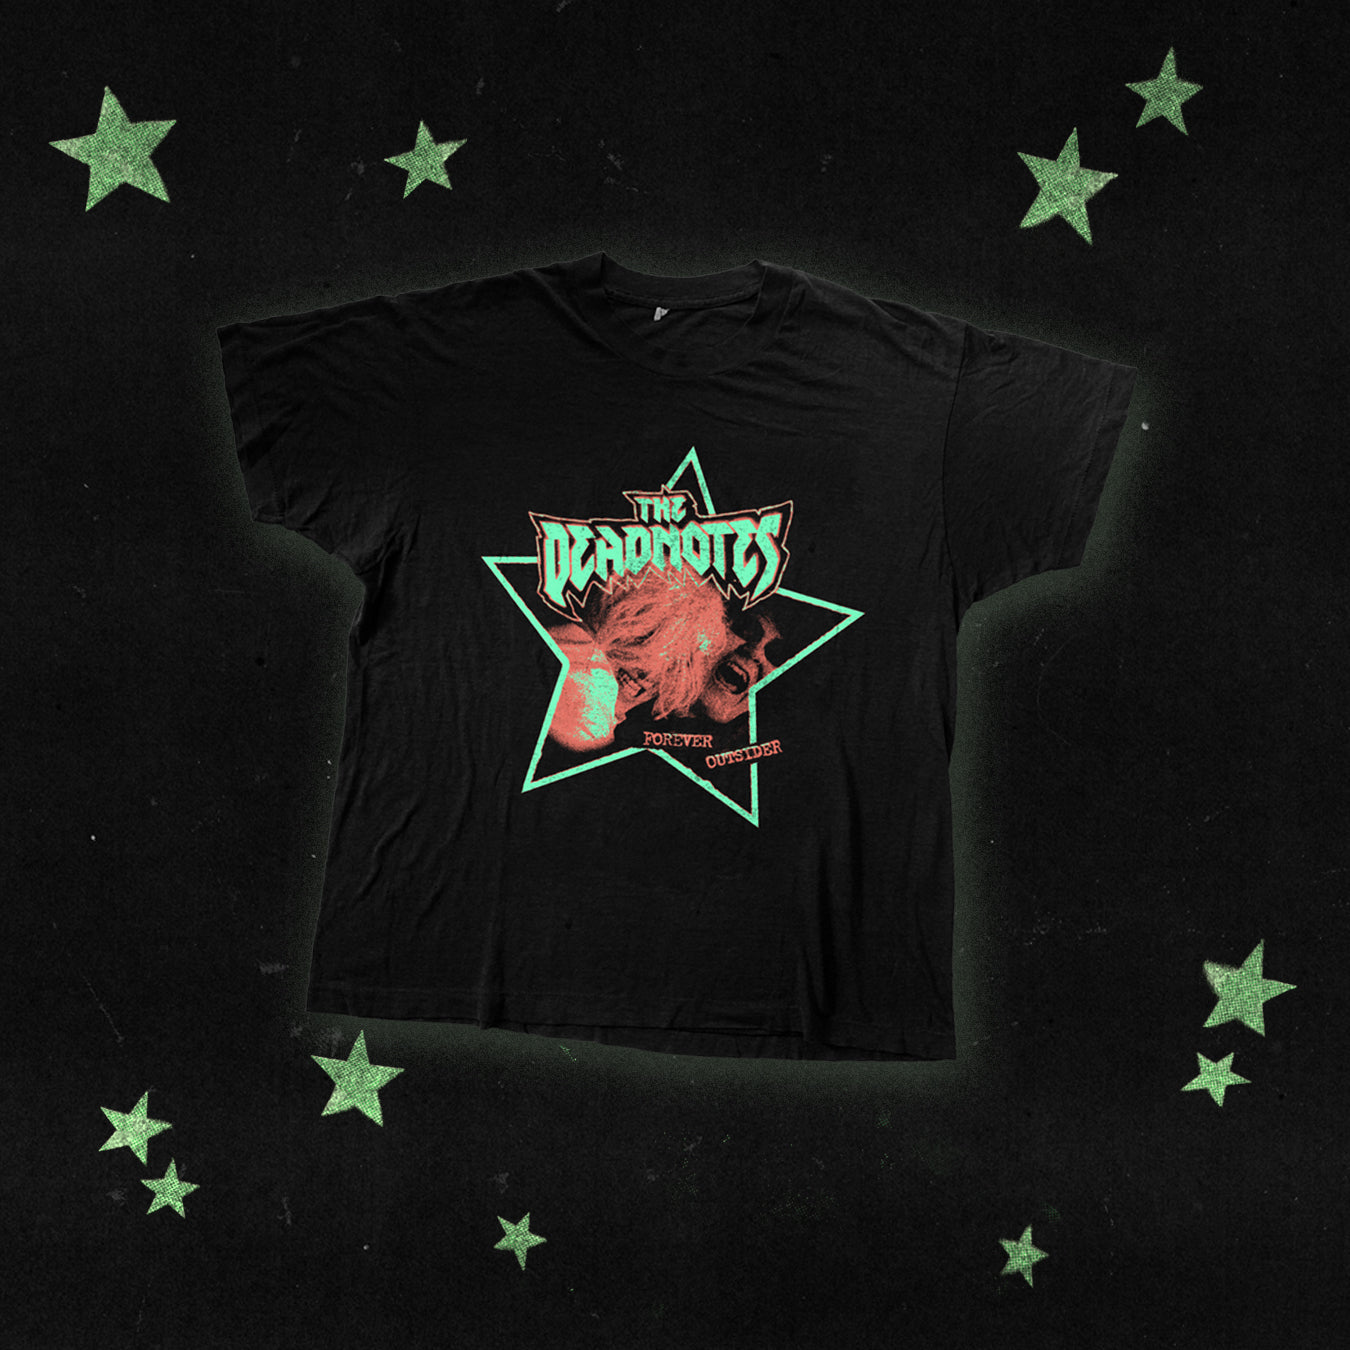 THE DEADNOTES: SHIRT 'FOREVER OUTSIDER' (GLOW IN THE DARK)